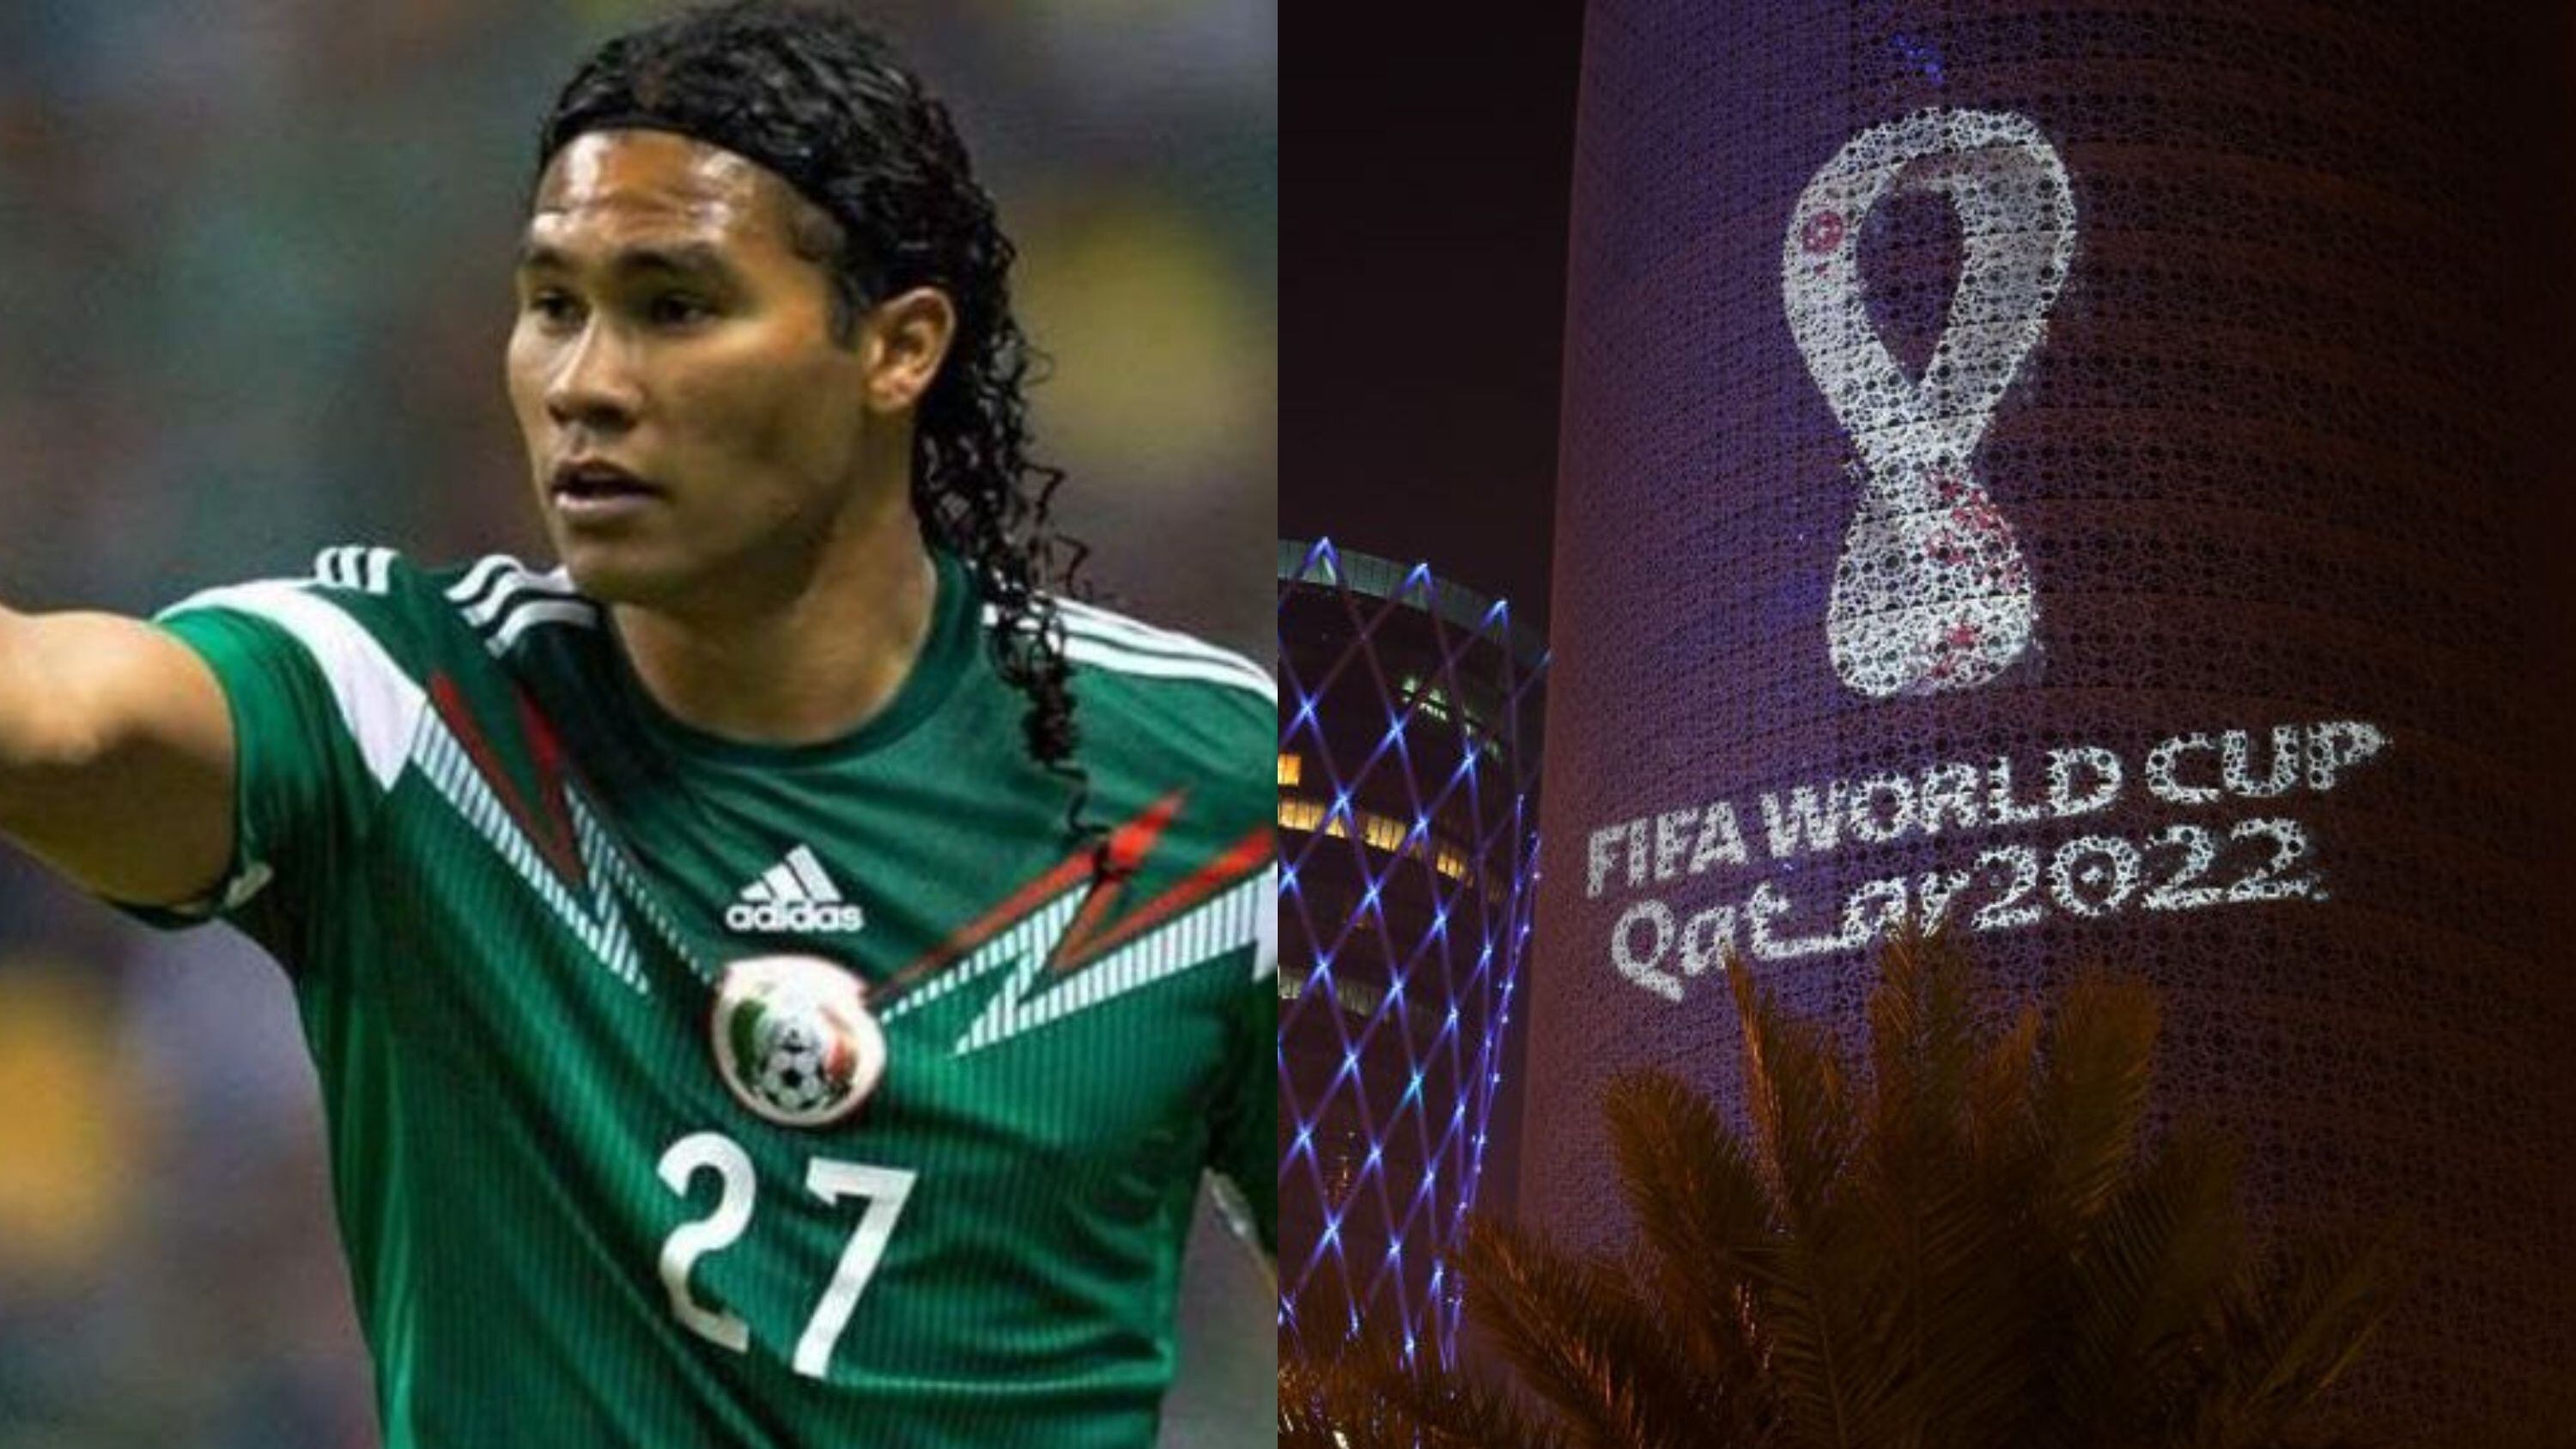 The new Gullit Peña who, against all odds, will go to Qatar 2022